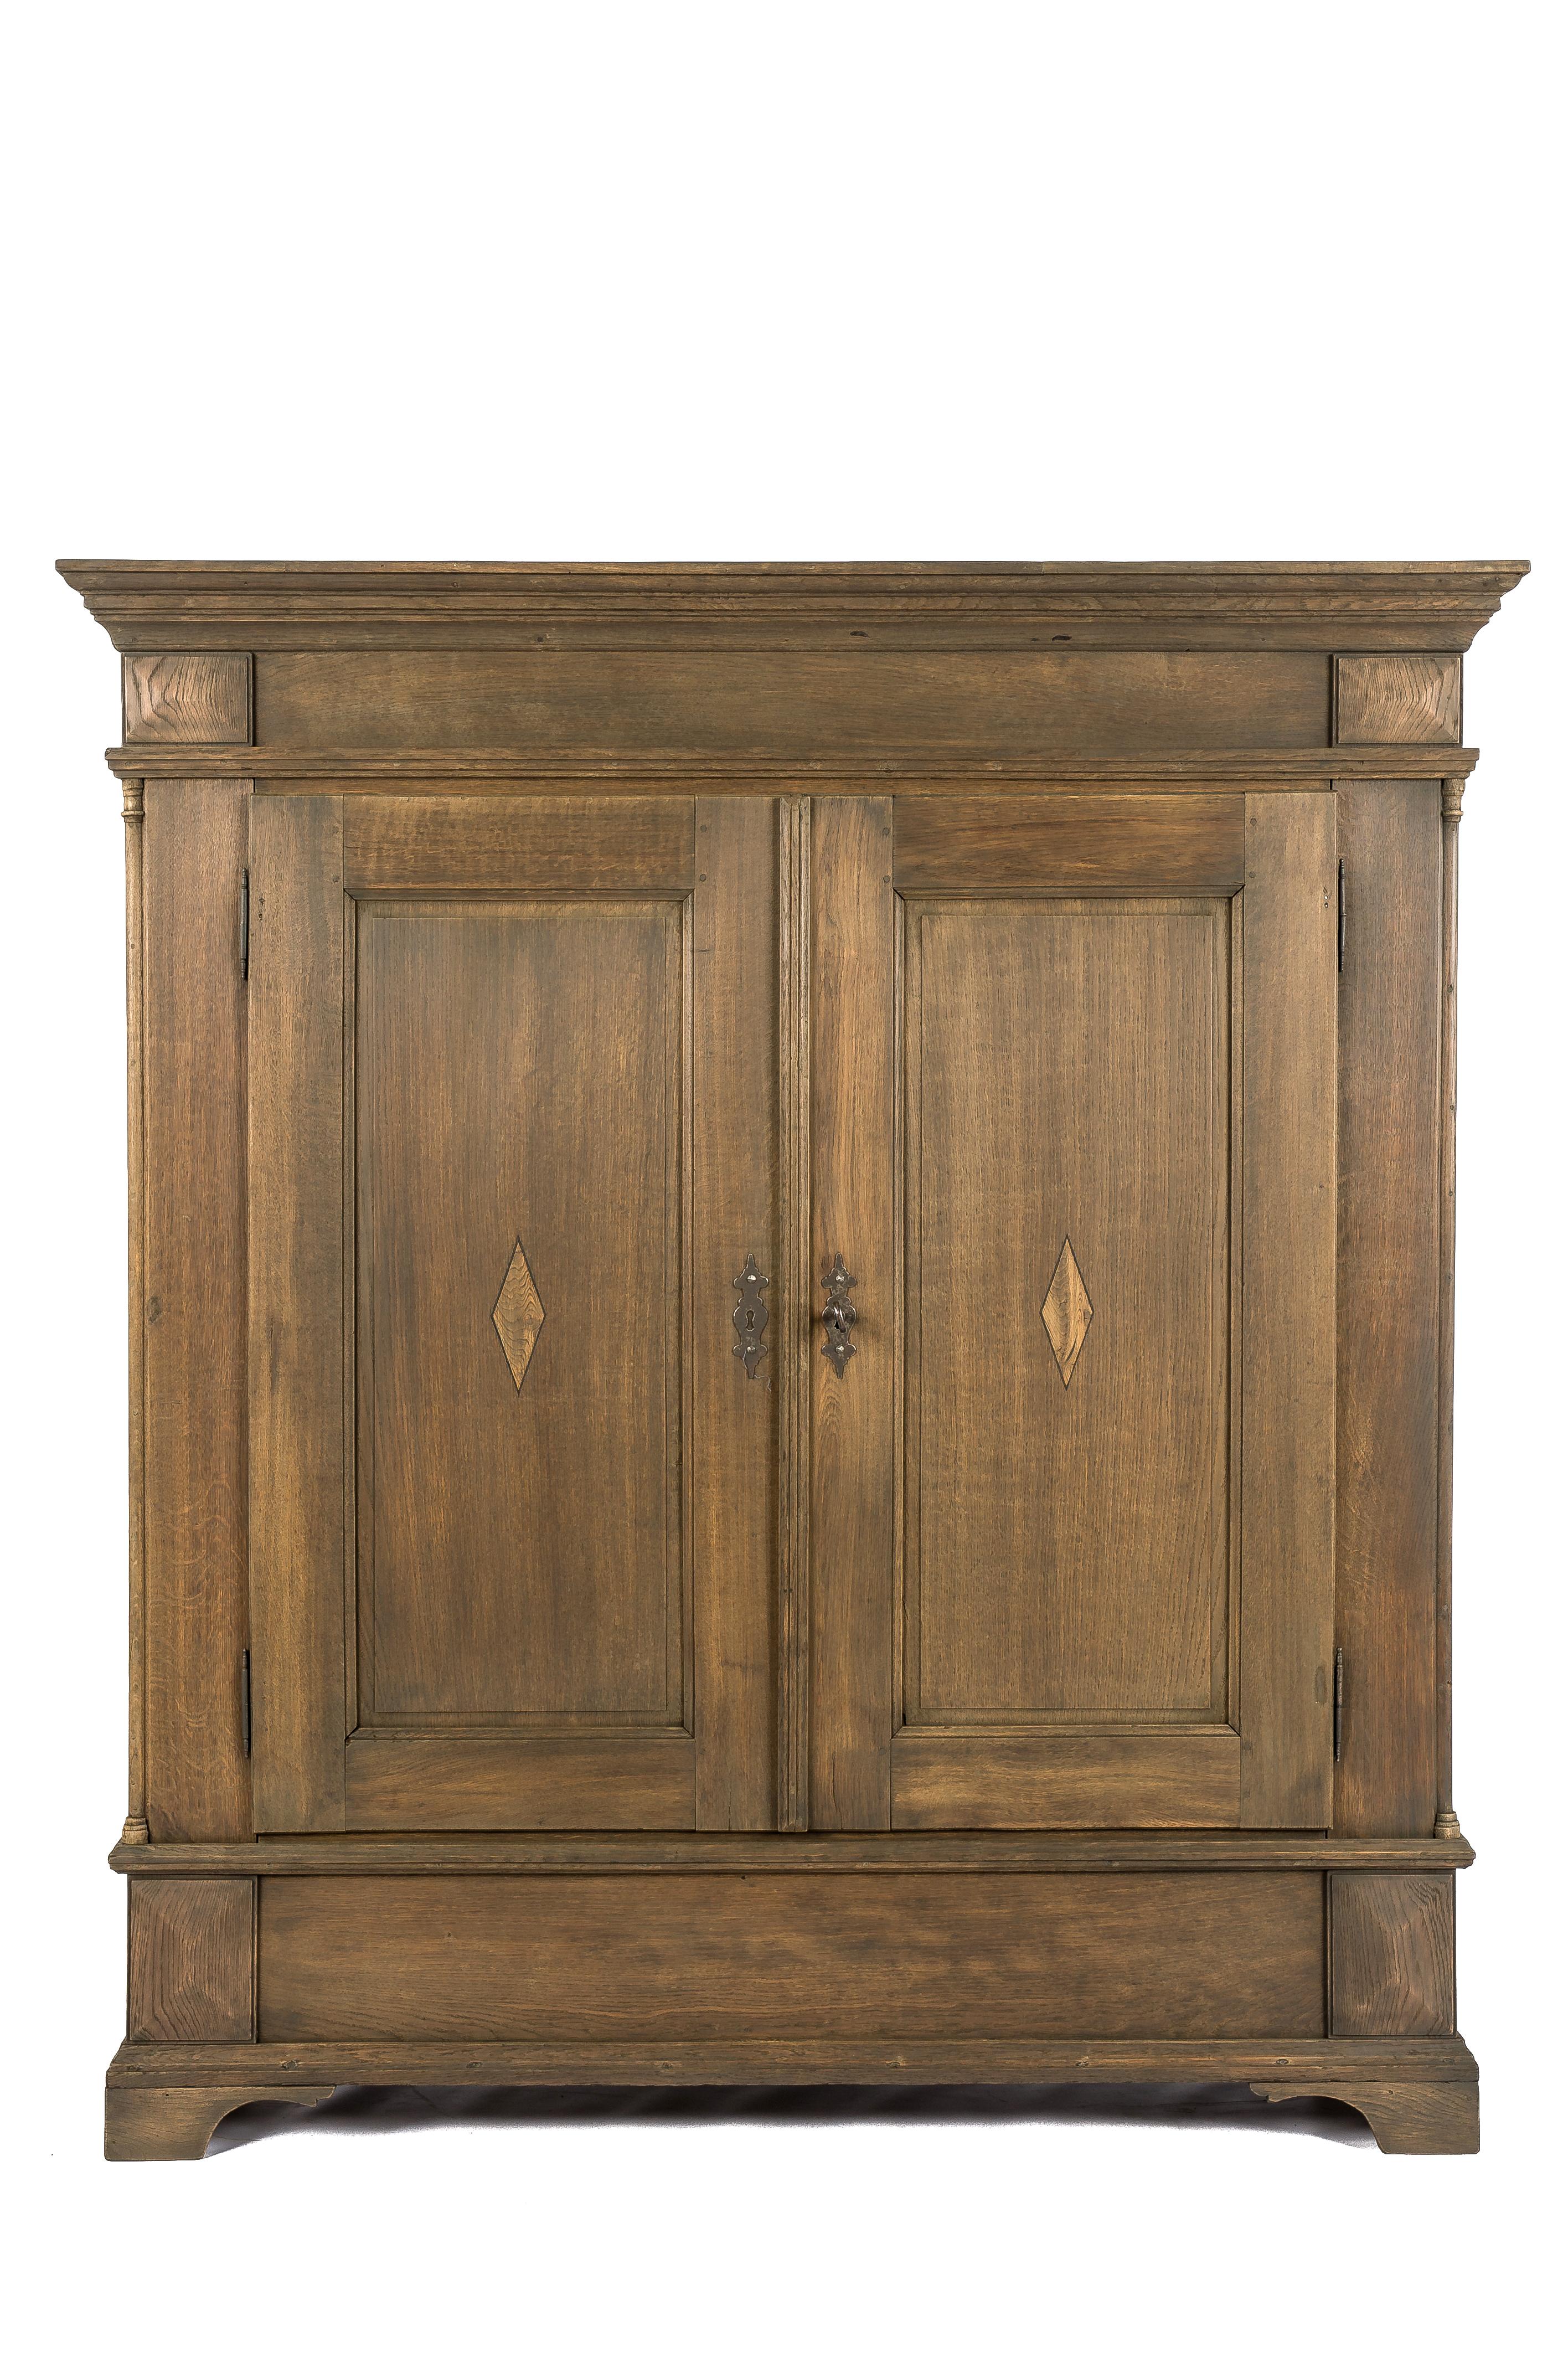 Antique 19th-century German solid oak two-door gray matte finished cupboard  For Sale 7